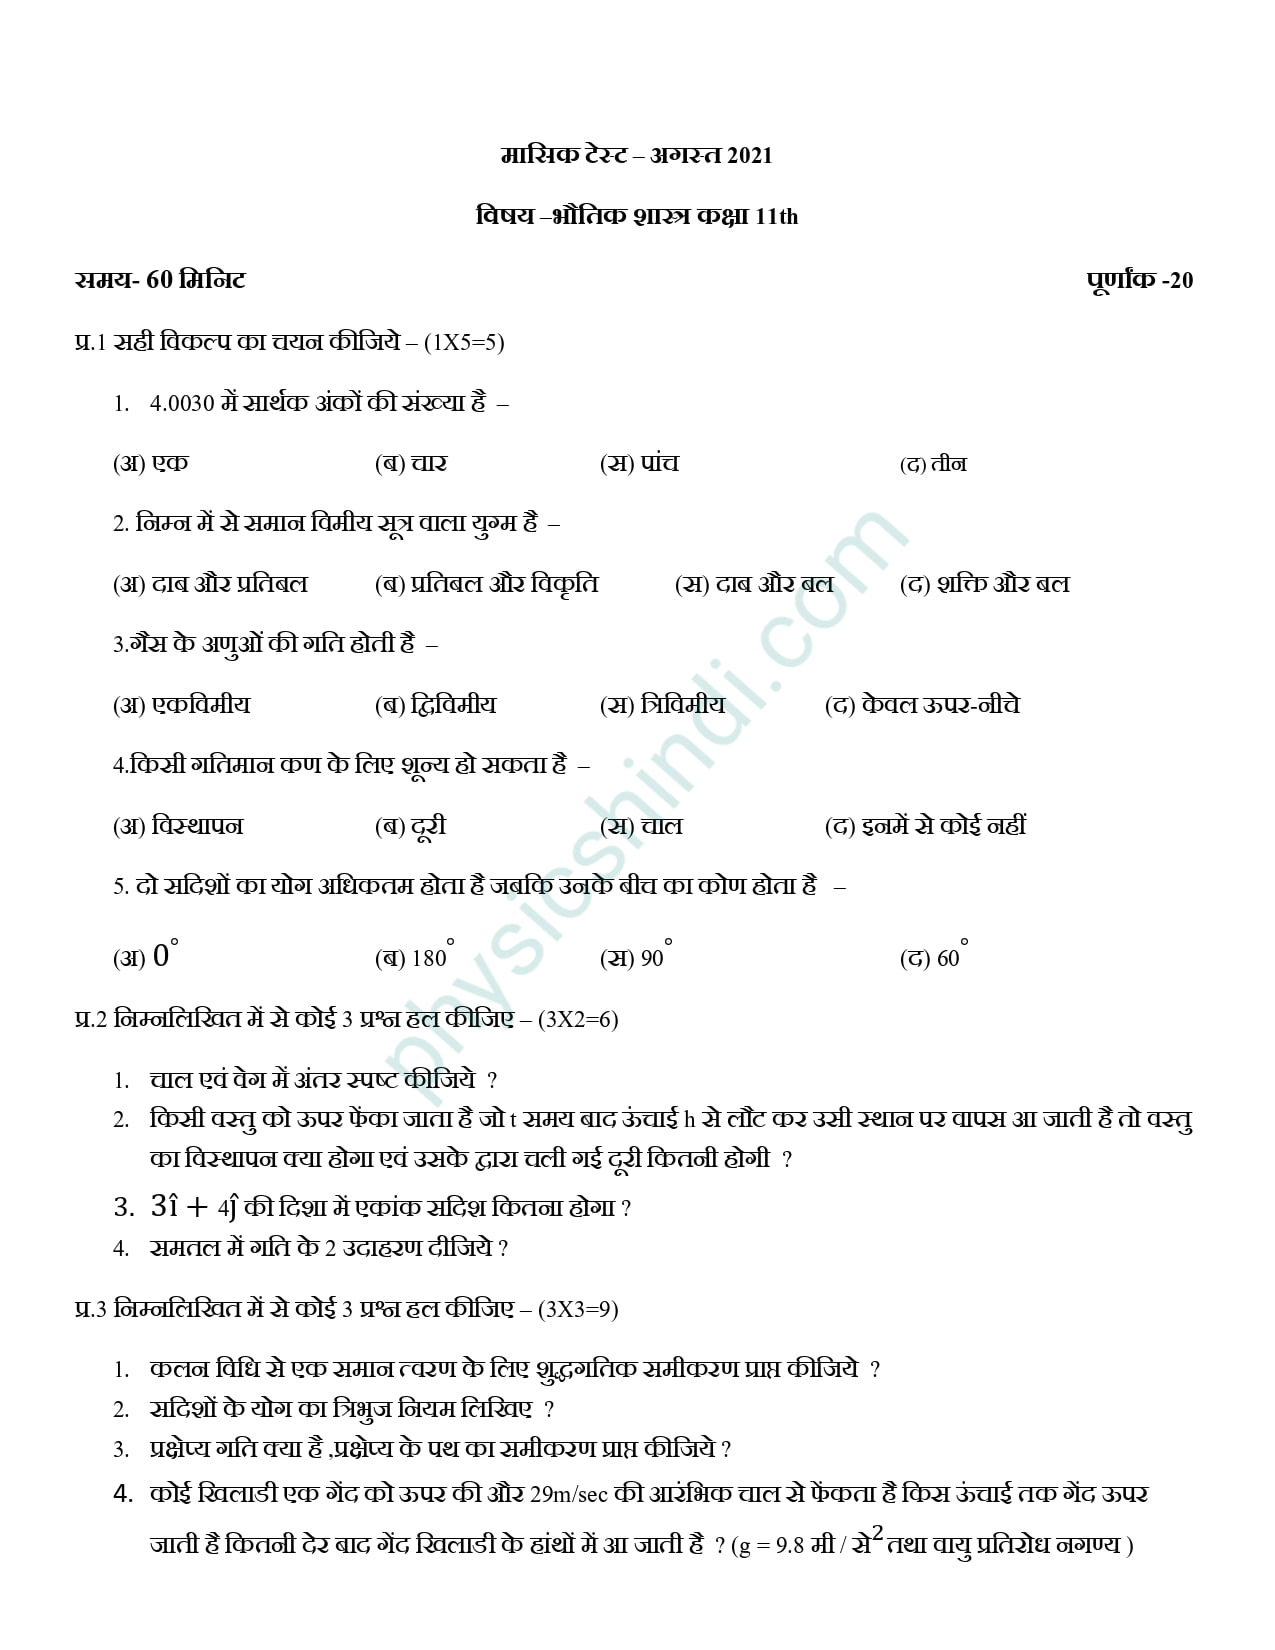 11th physics monthly test solution august mp board